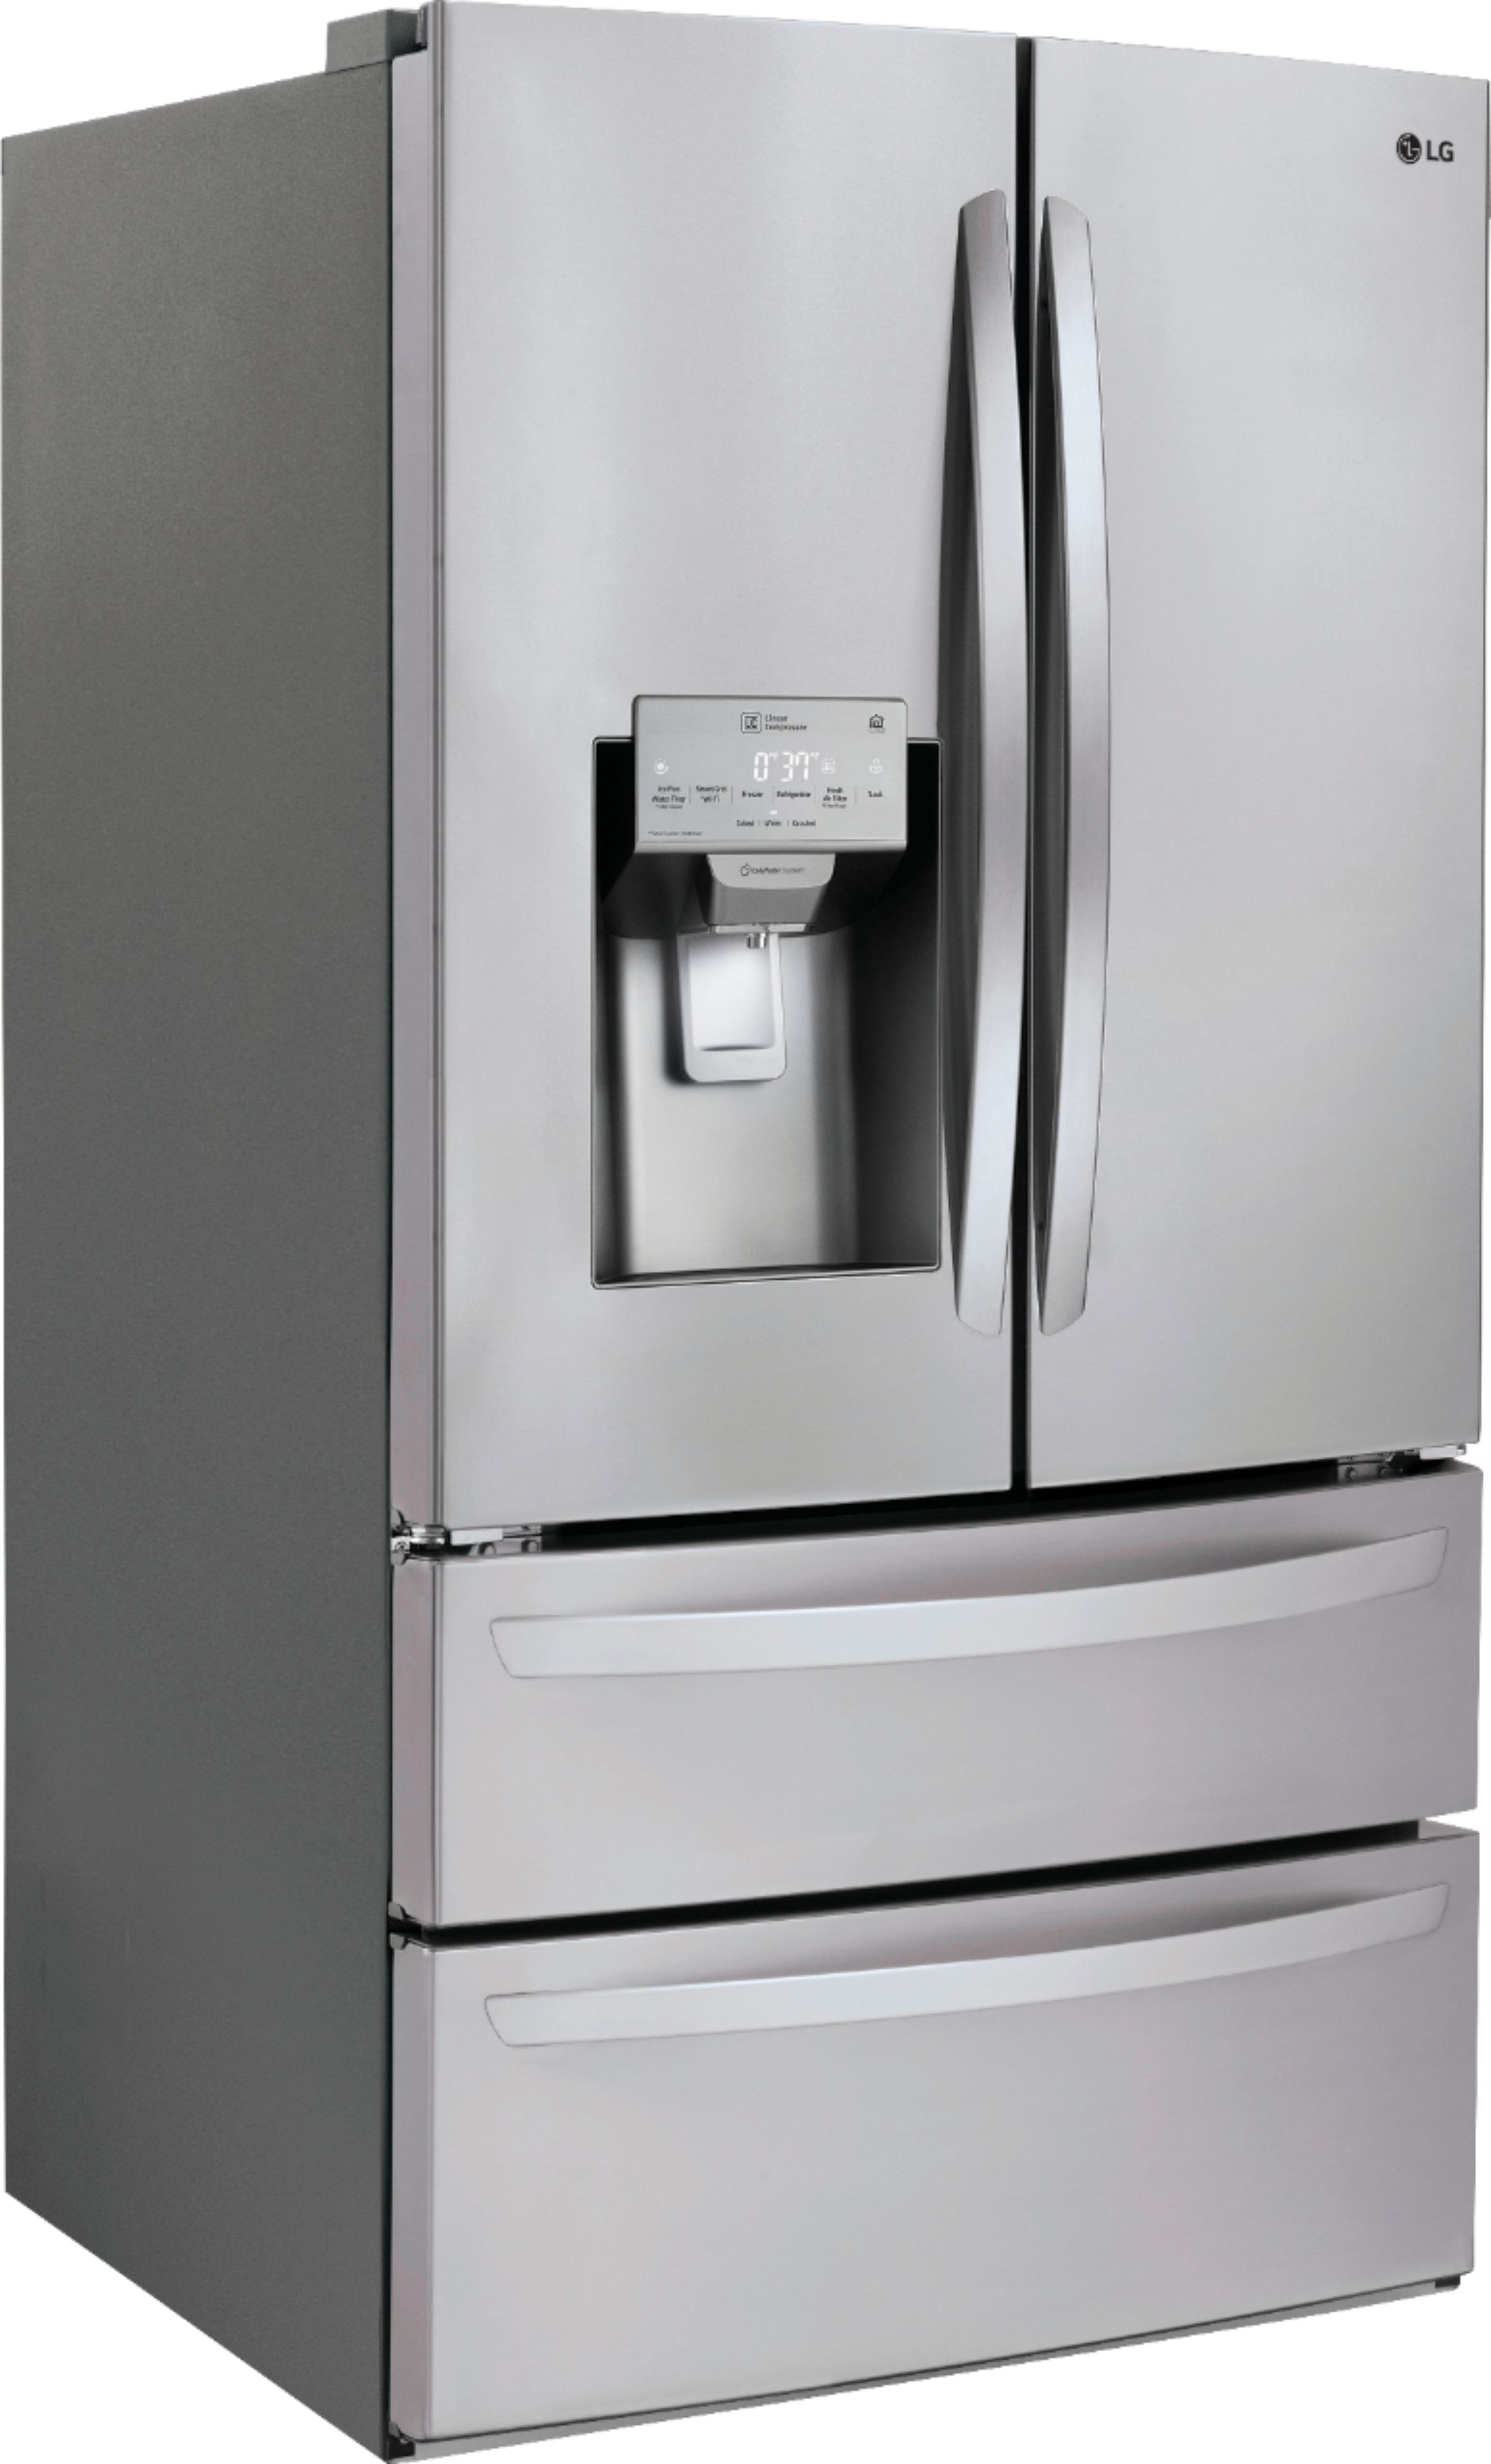 Angle View: LG - 27.8 Cu. Ft. 4-Door French Door Smart Refrigerator with Smart Cooling System - Stainless Steel